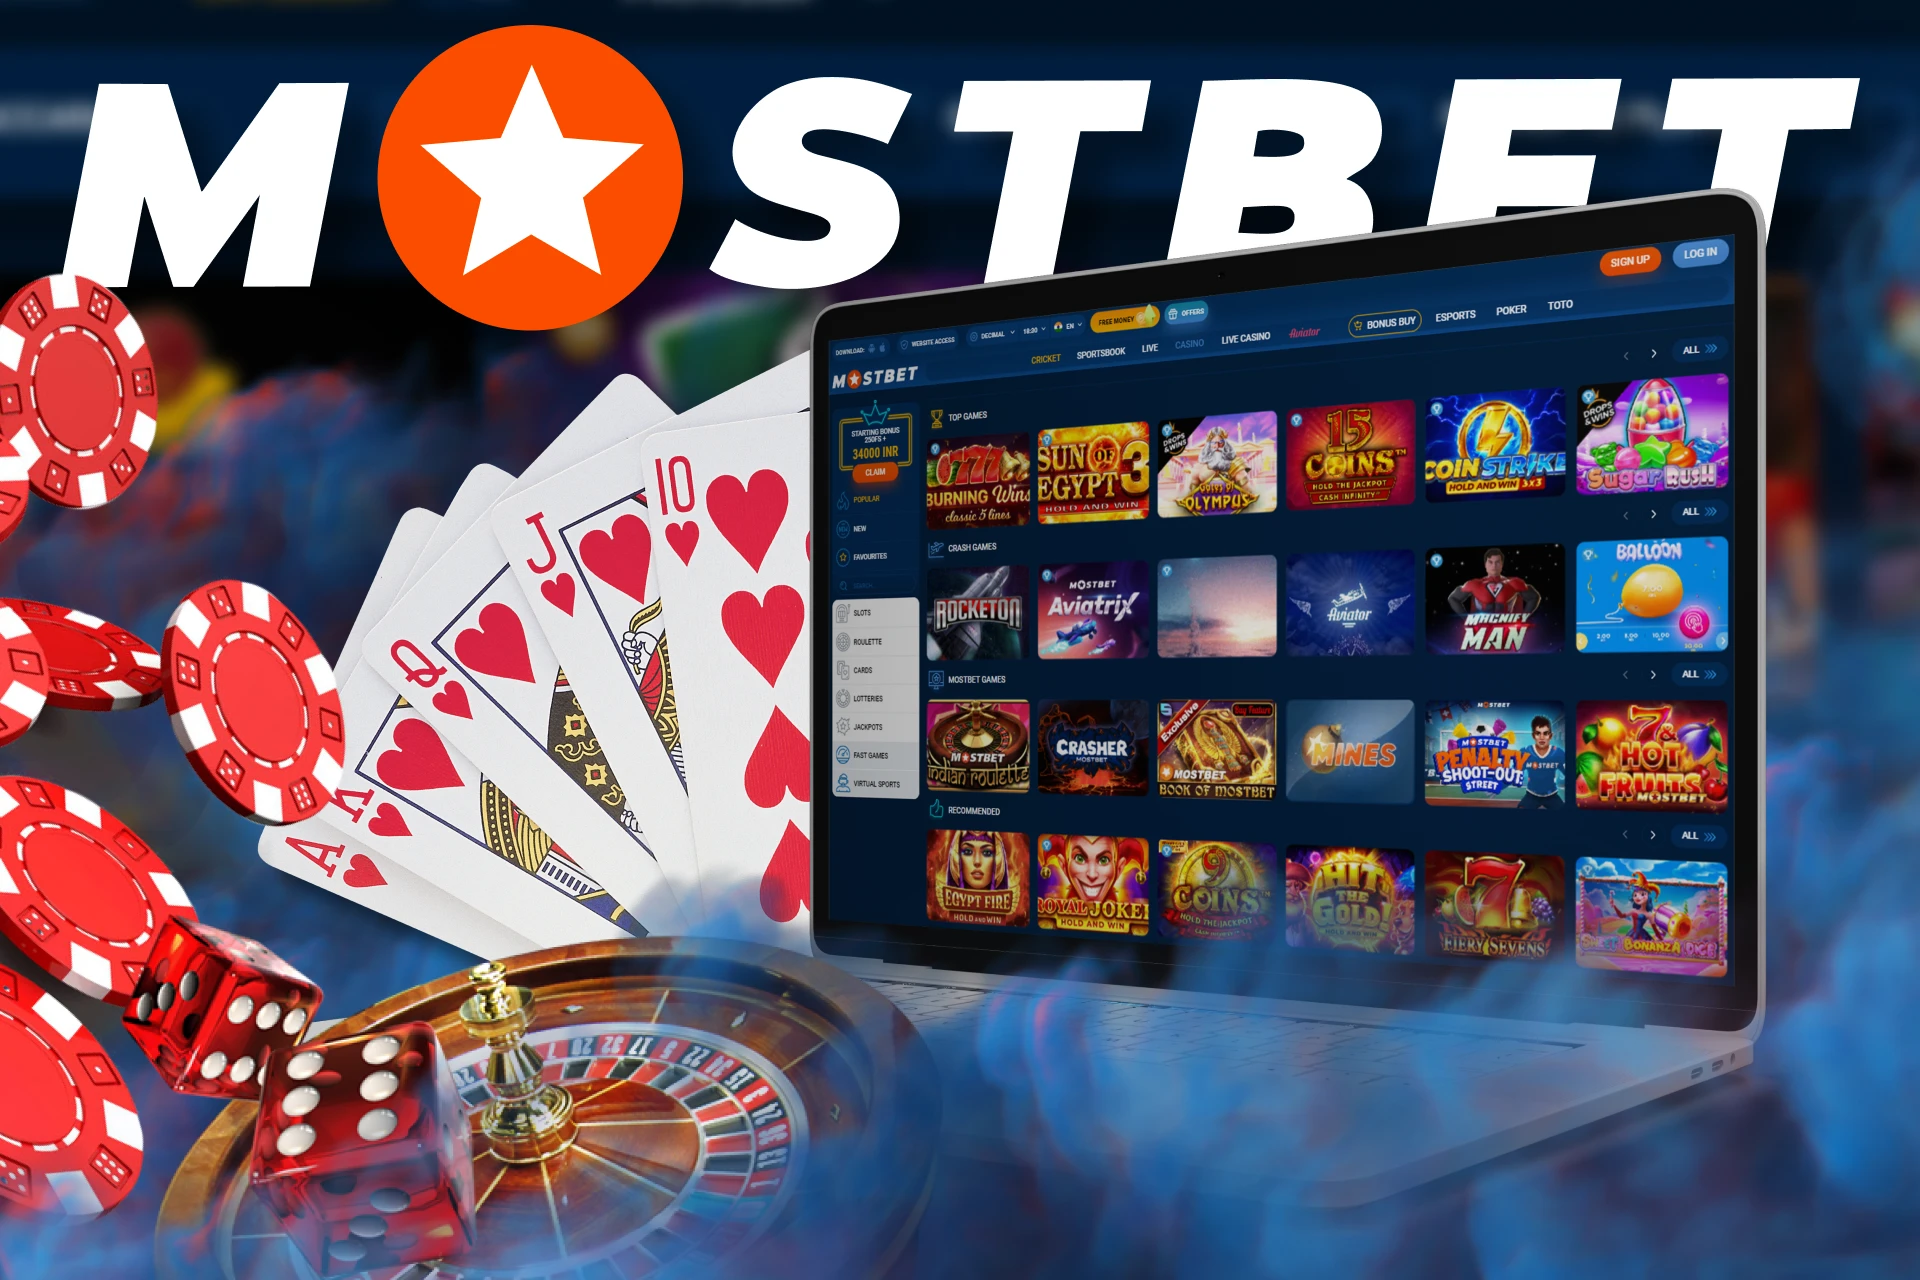 Play different games at Mostbet.